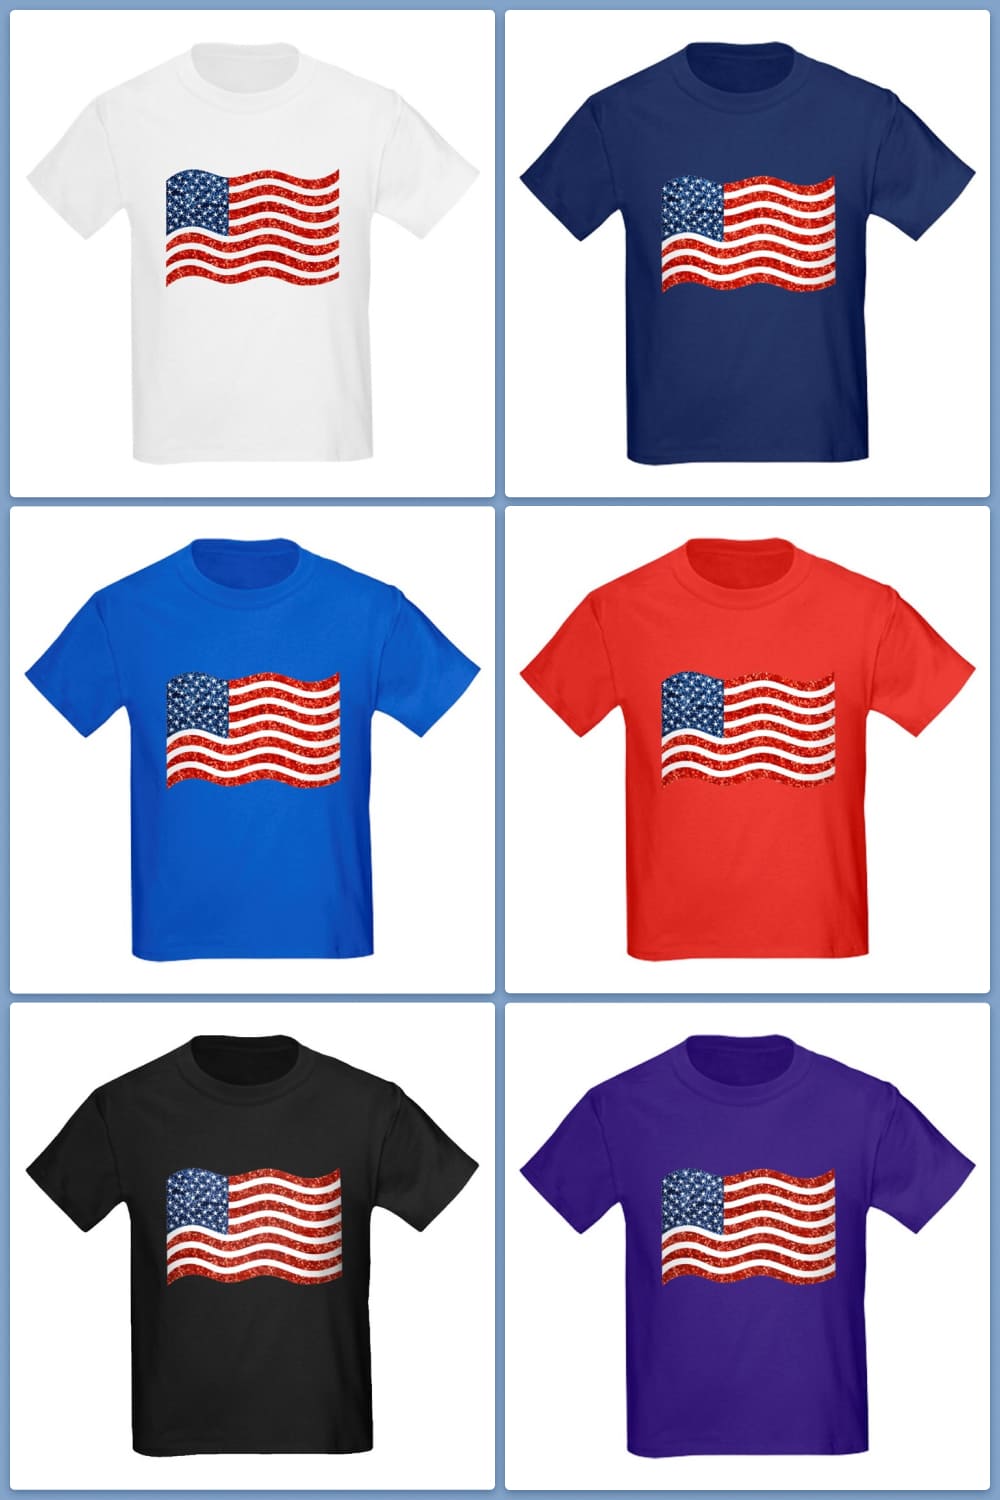 Collage of colorful t-shirts with wavy usa flag.